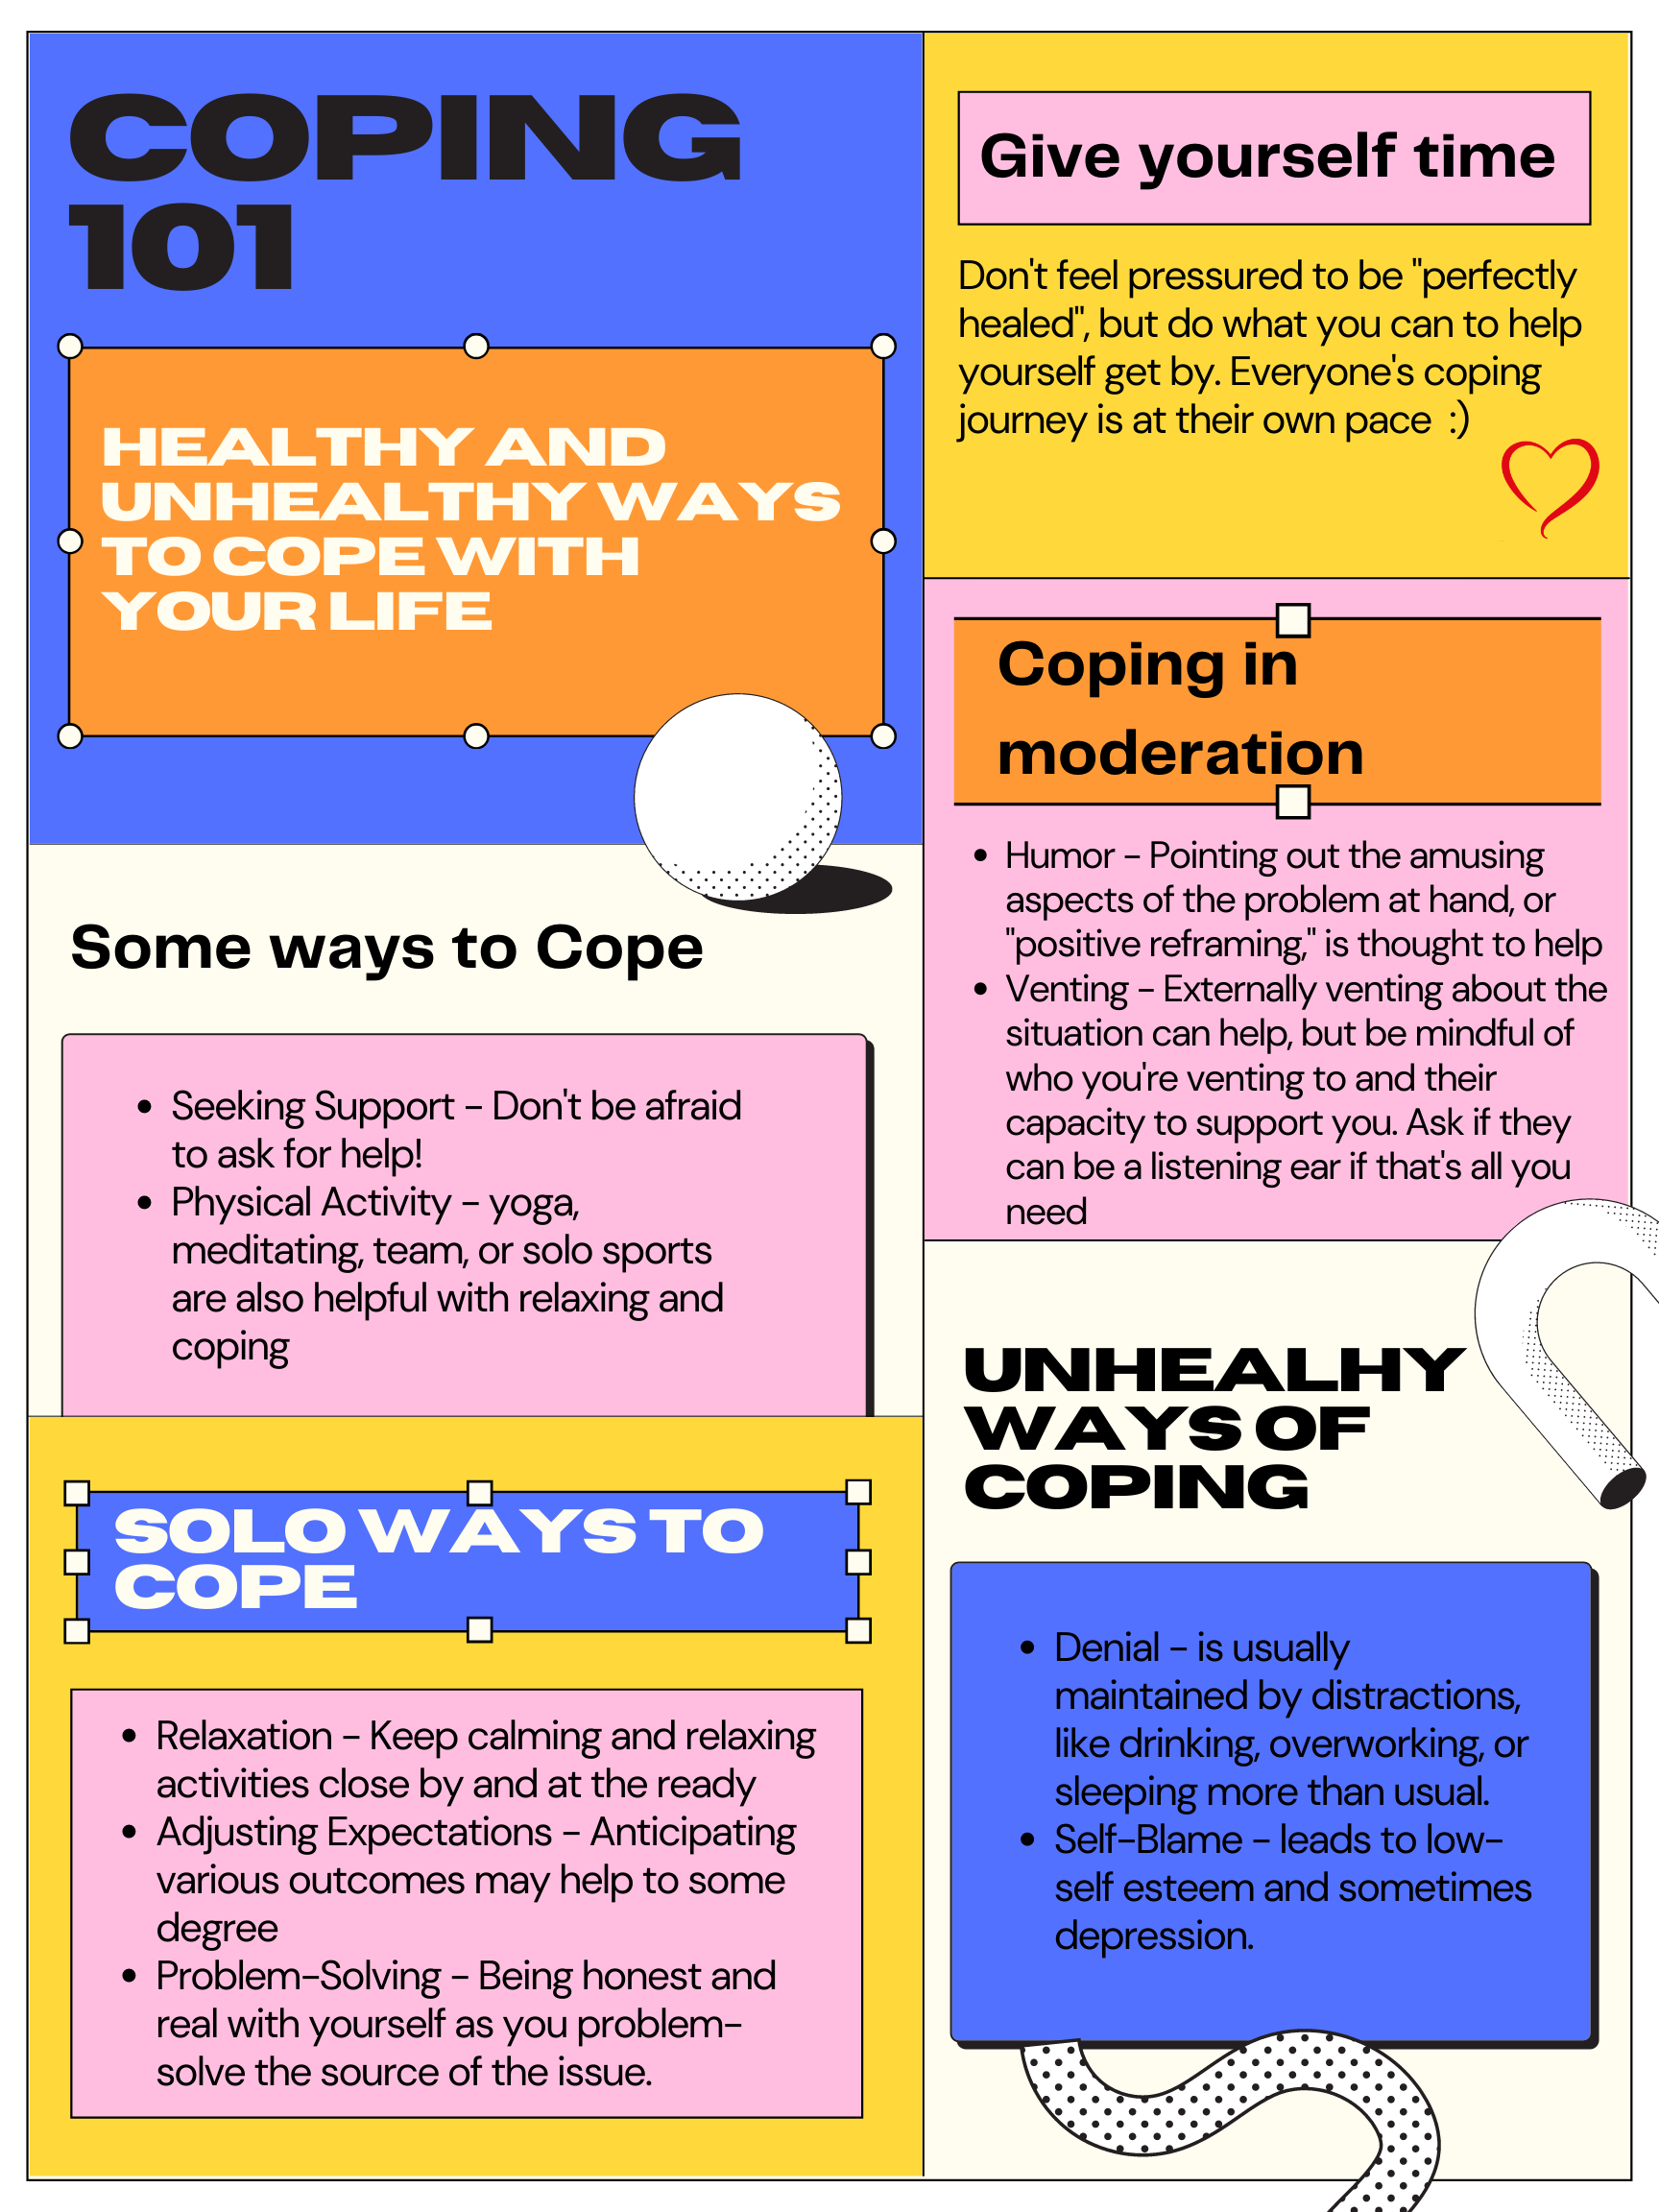 TCSC - Coping Infographic.png